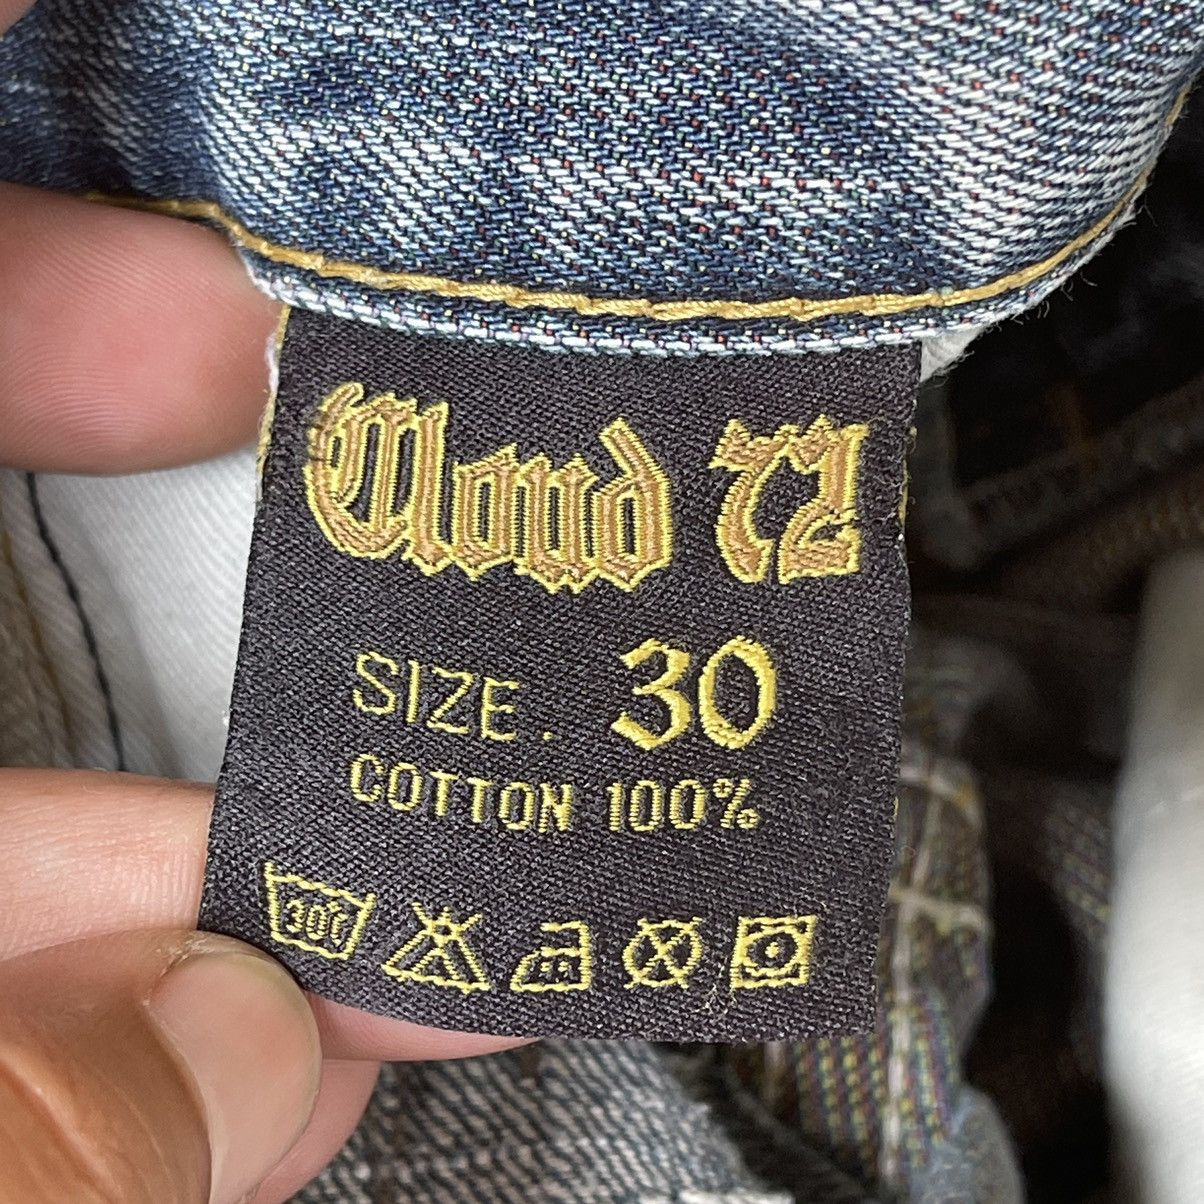 ✅BINDING NOW✅ Japanese Cloud72 Skull Jeans Disteressed Rare - 16